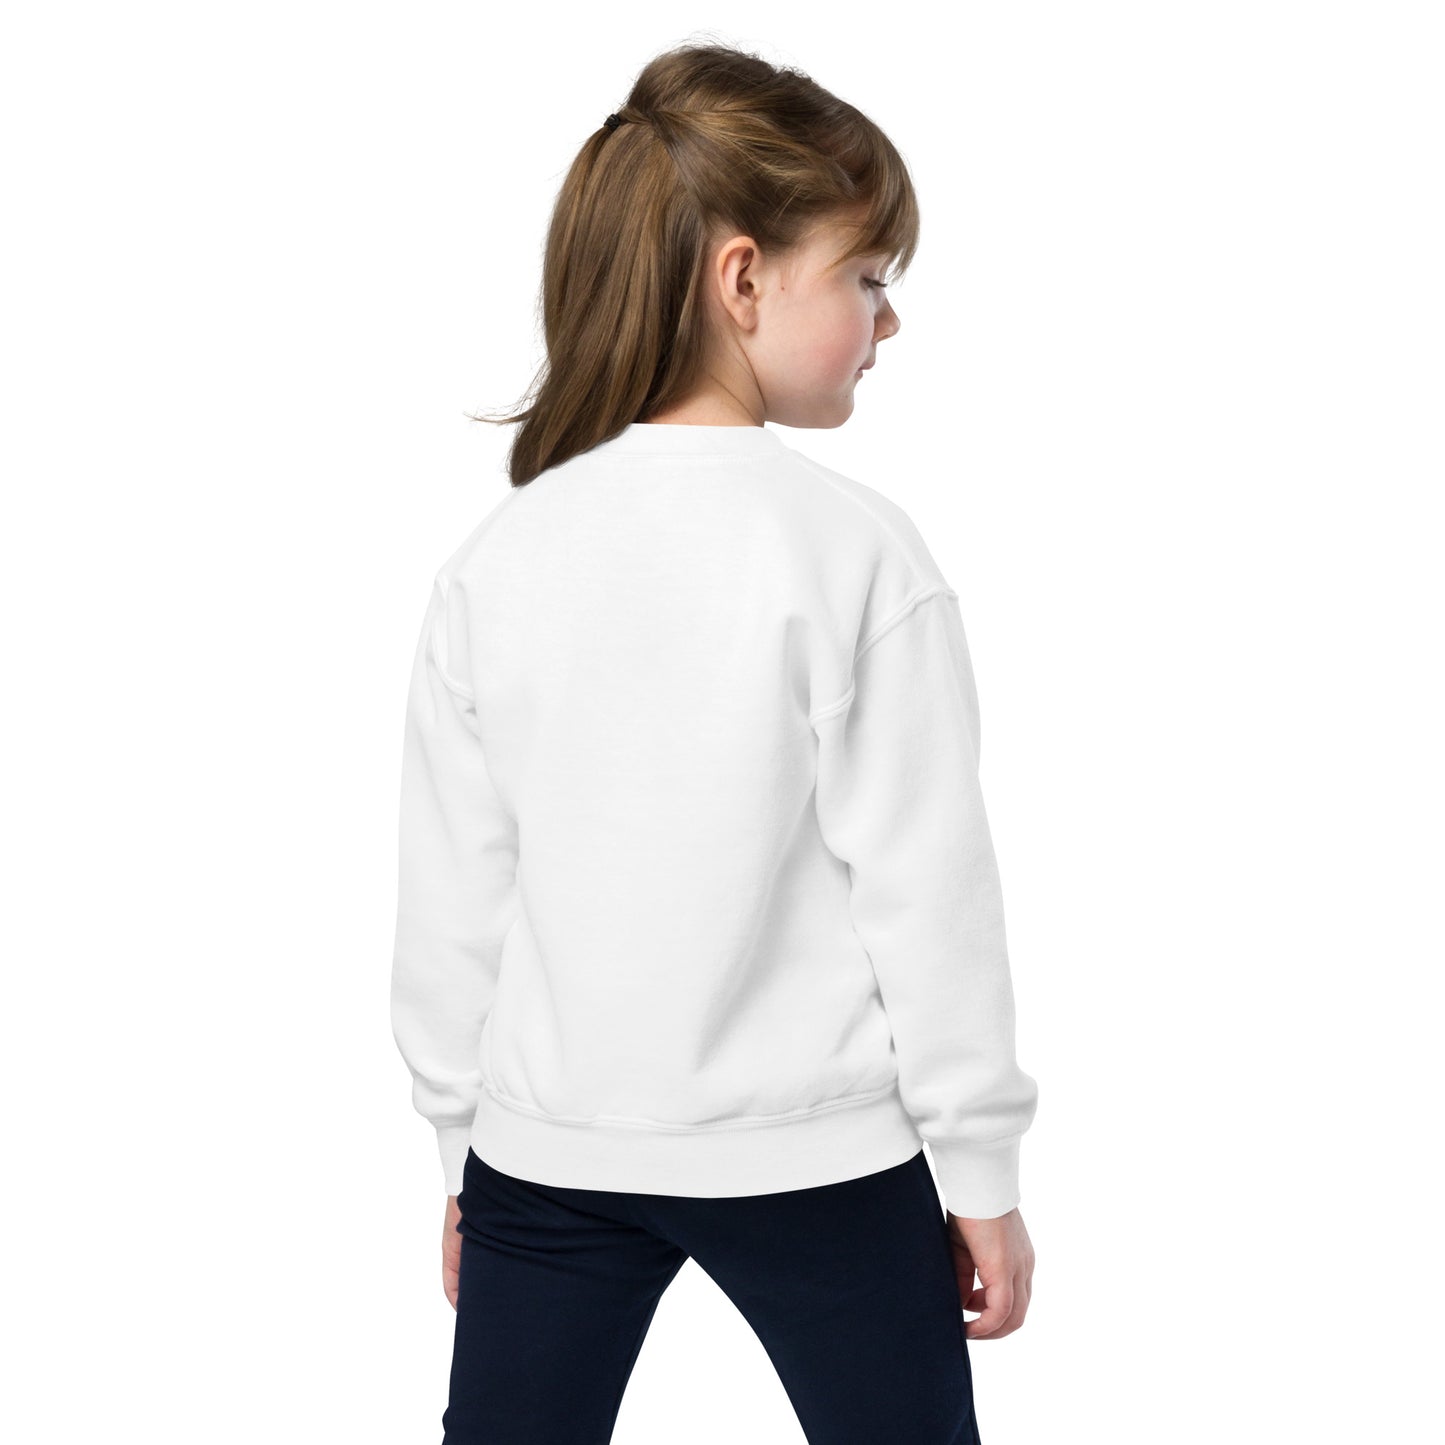 a young girl wearing a white sweatshirt and black pants